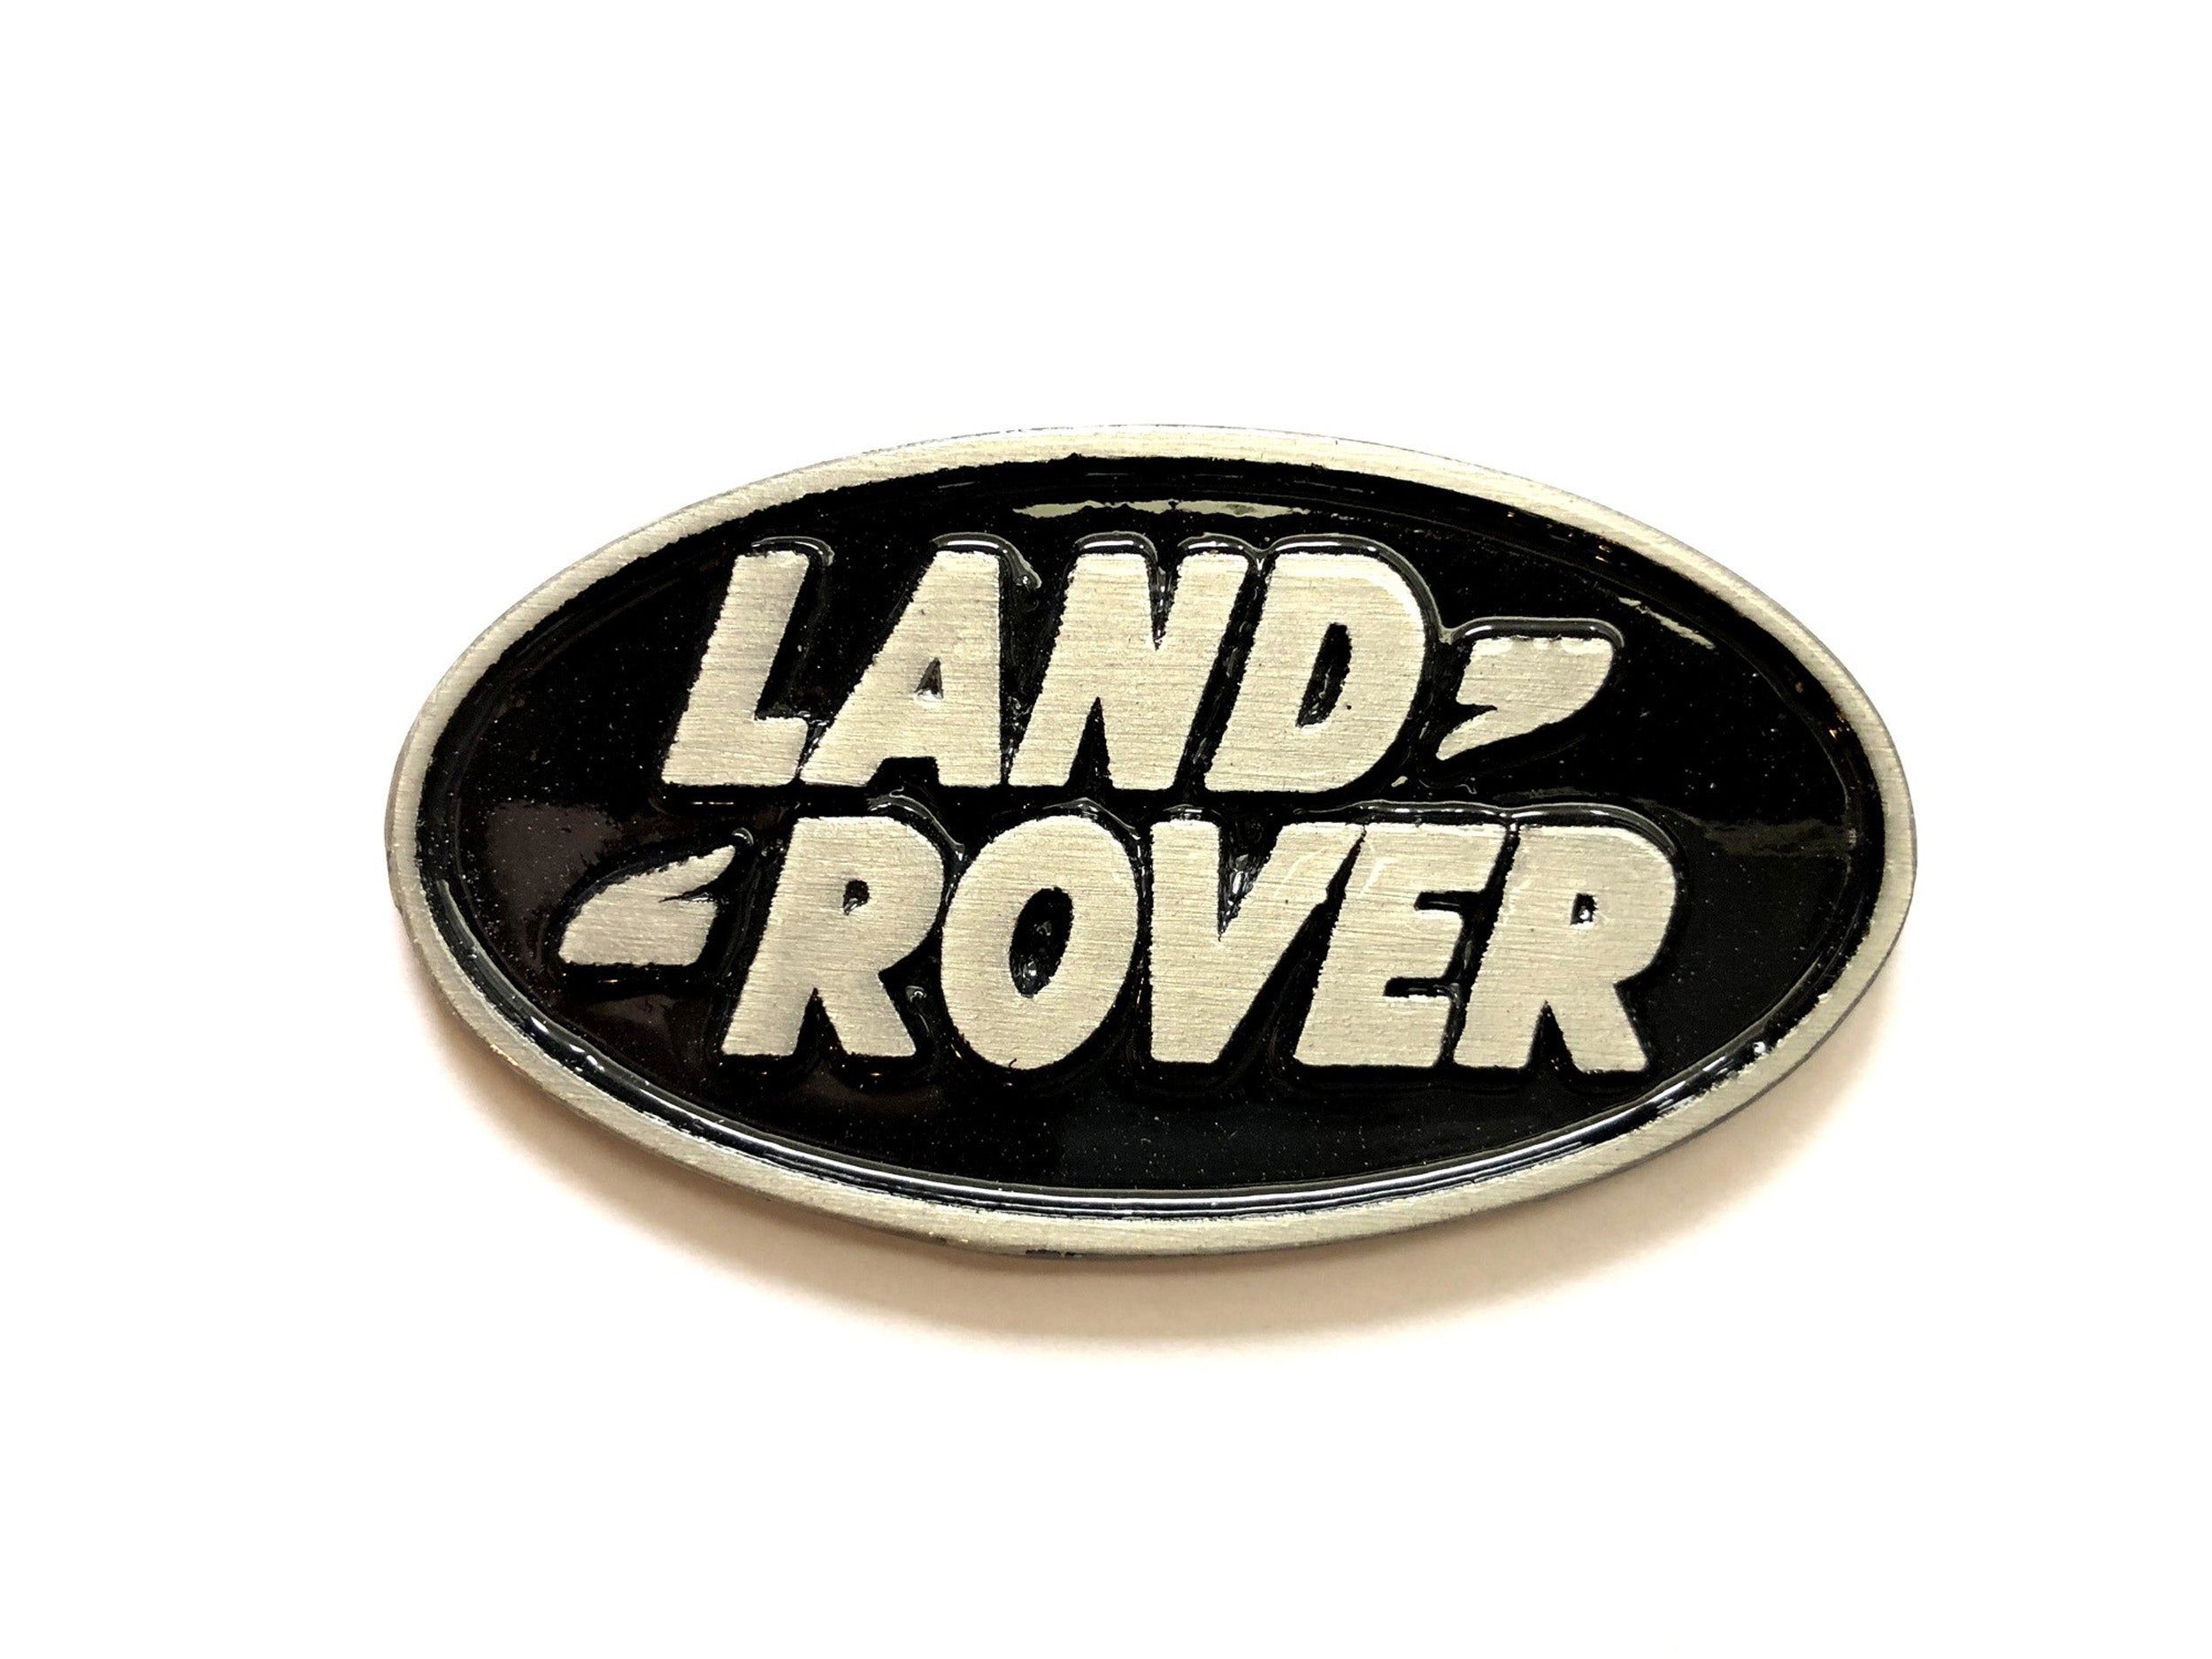 "Land Rover" Small Oval Badge (Cast Aluminum)